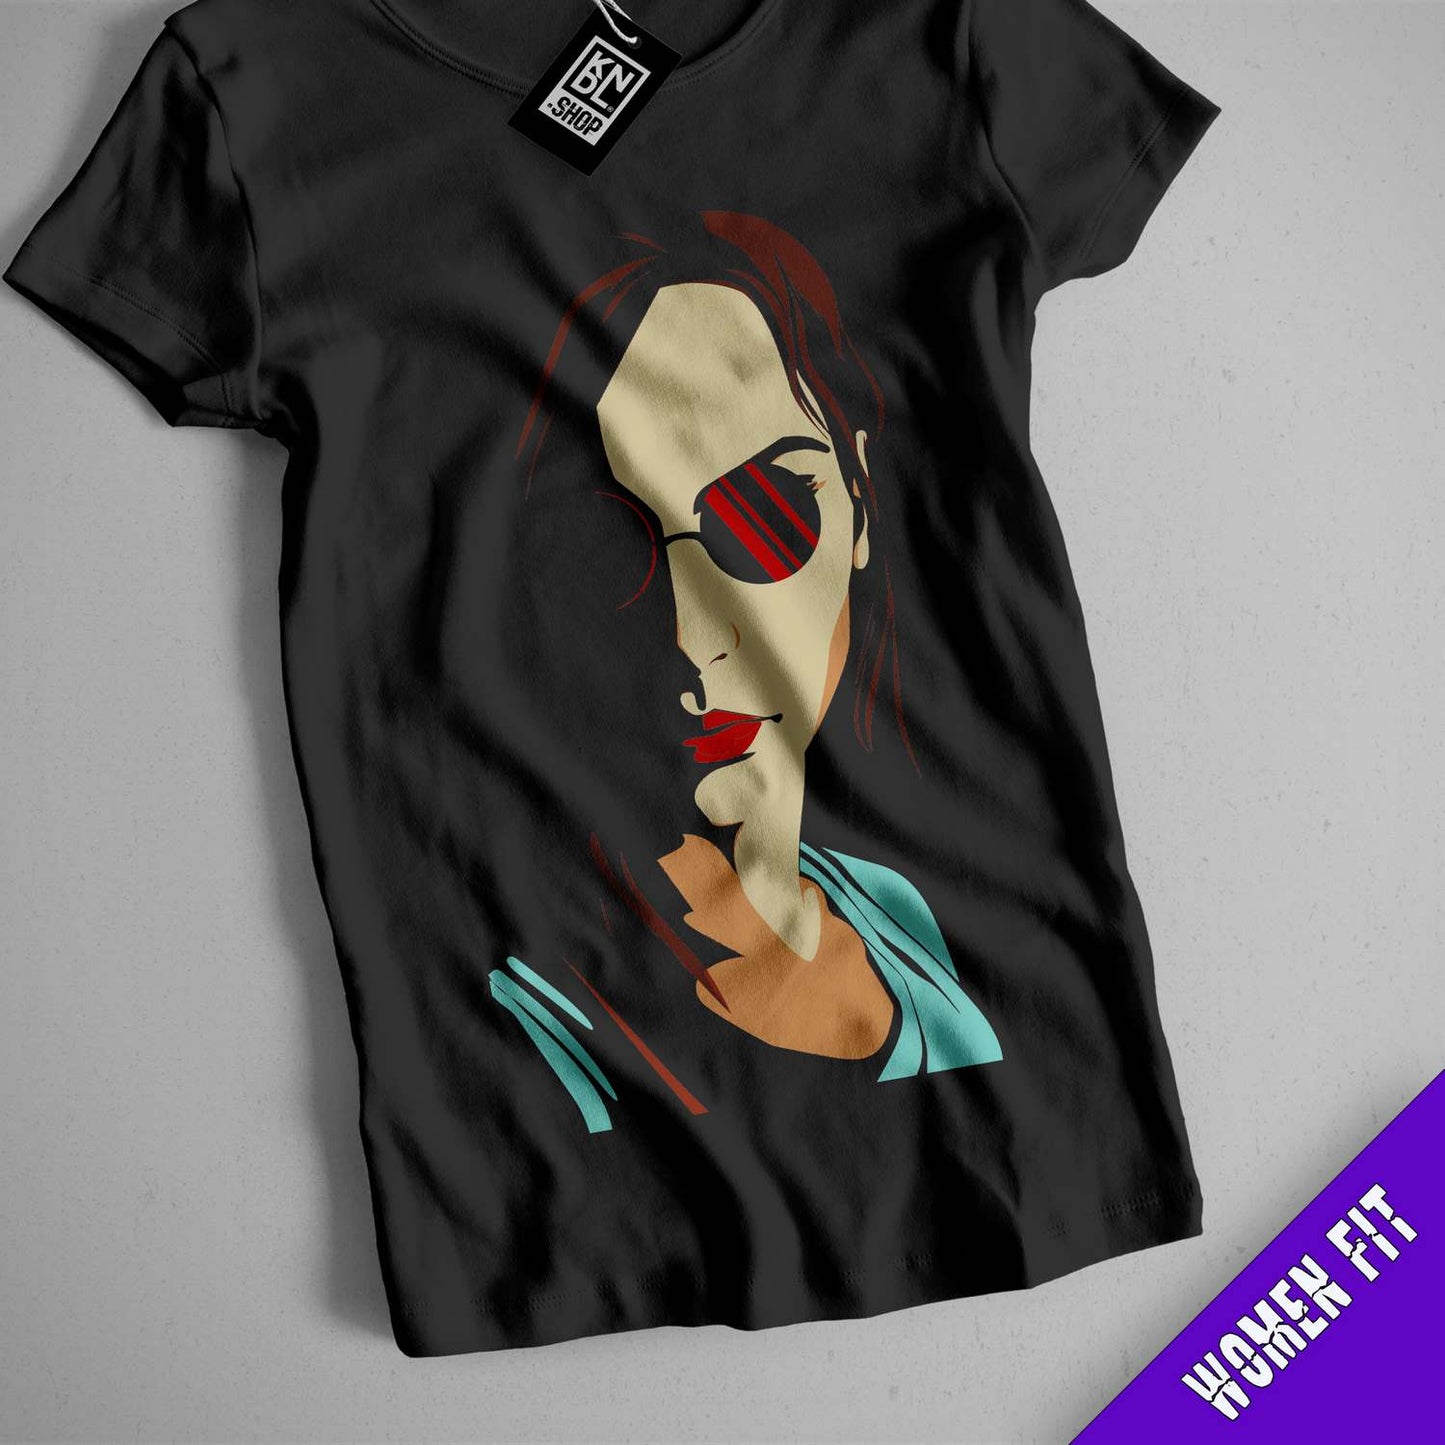 a t - shirt with a picture of a woman wearing sunglasses